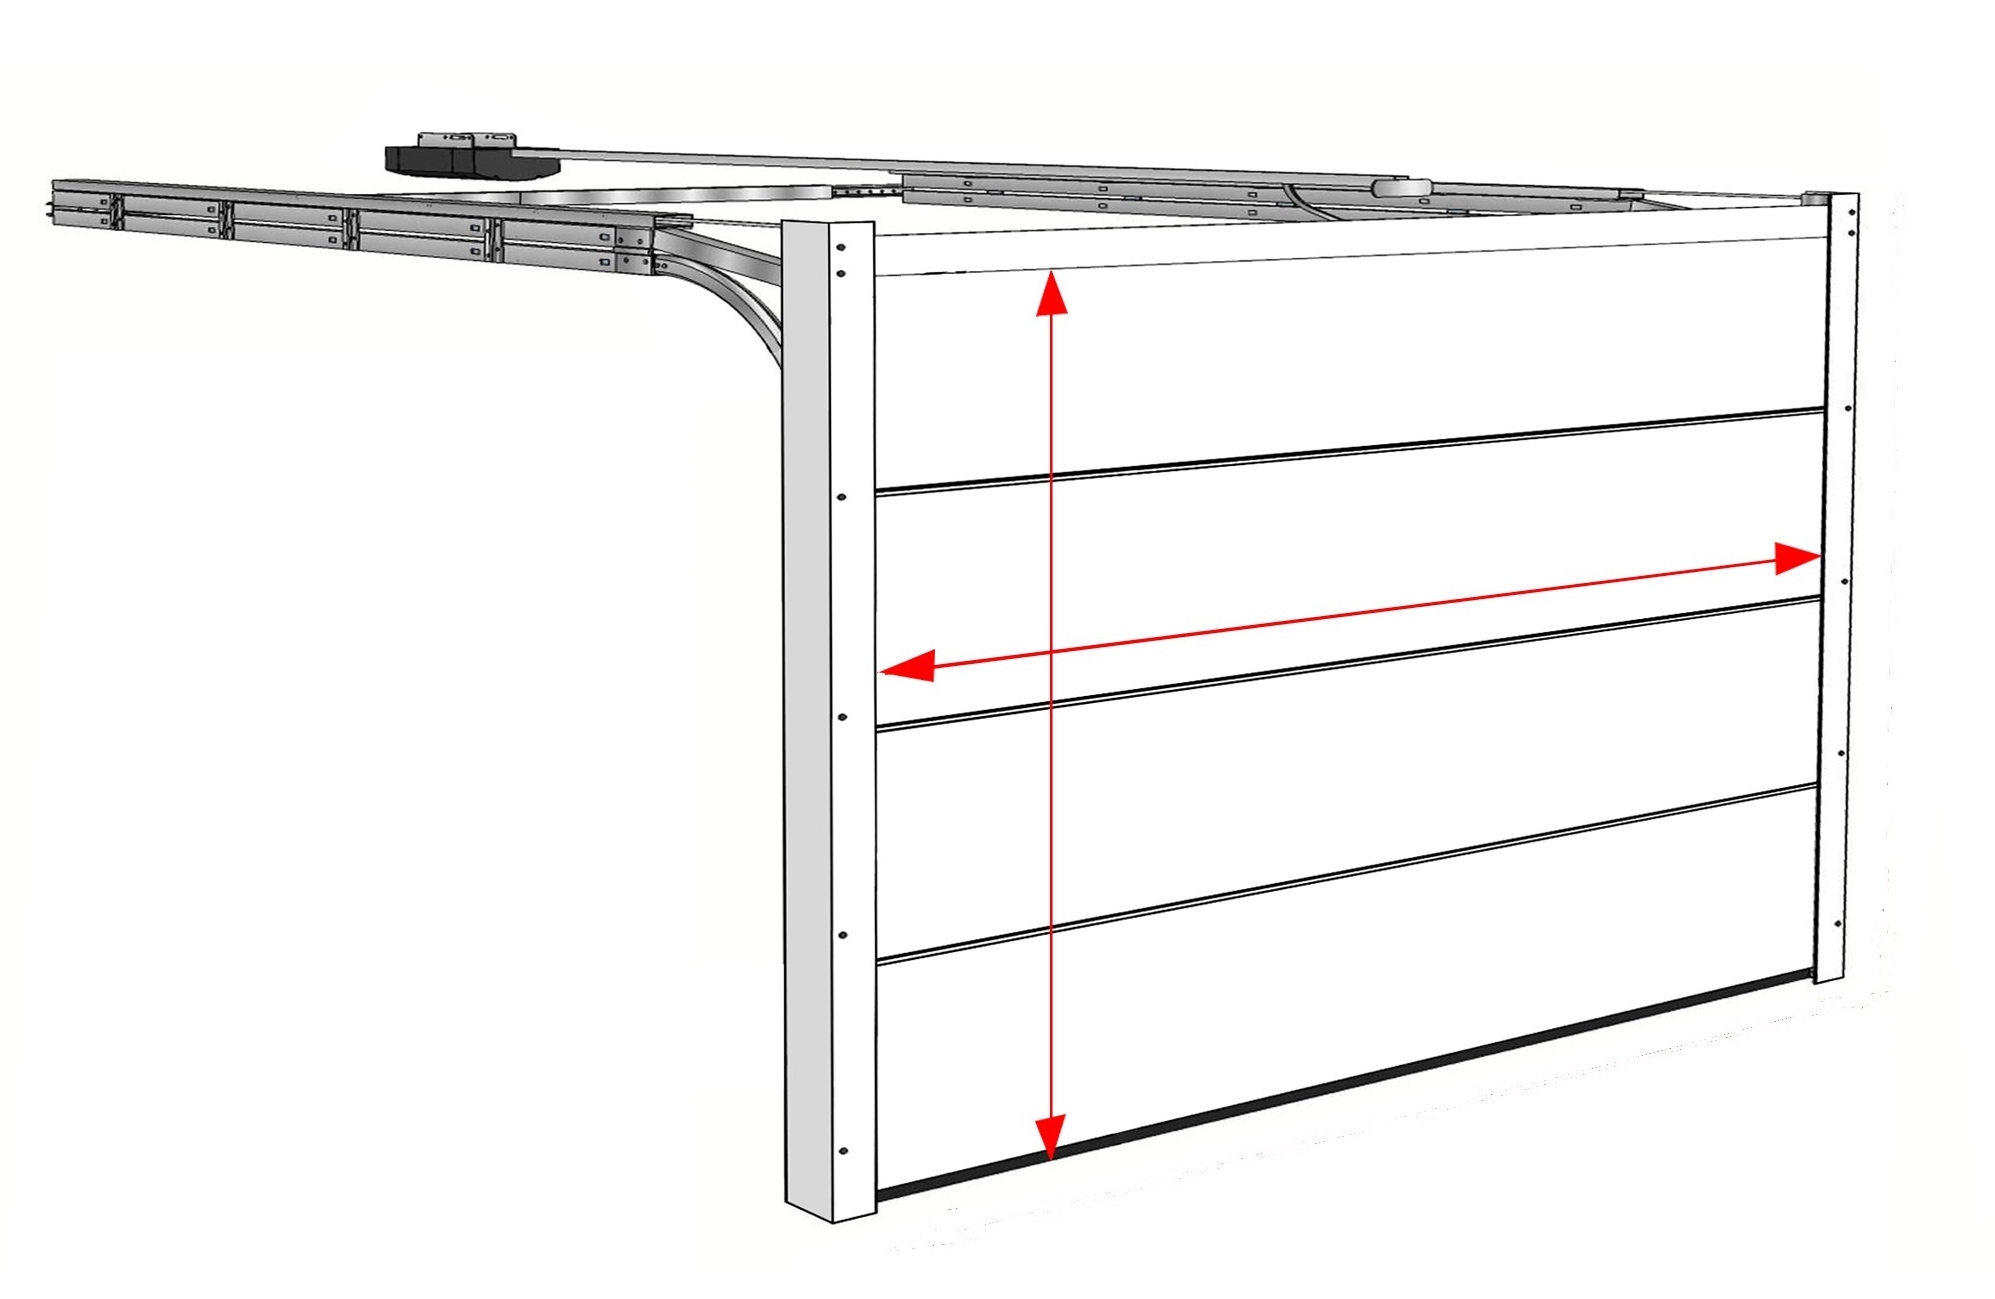 sectional door width and height does not include the frame